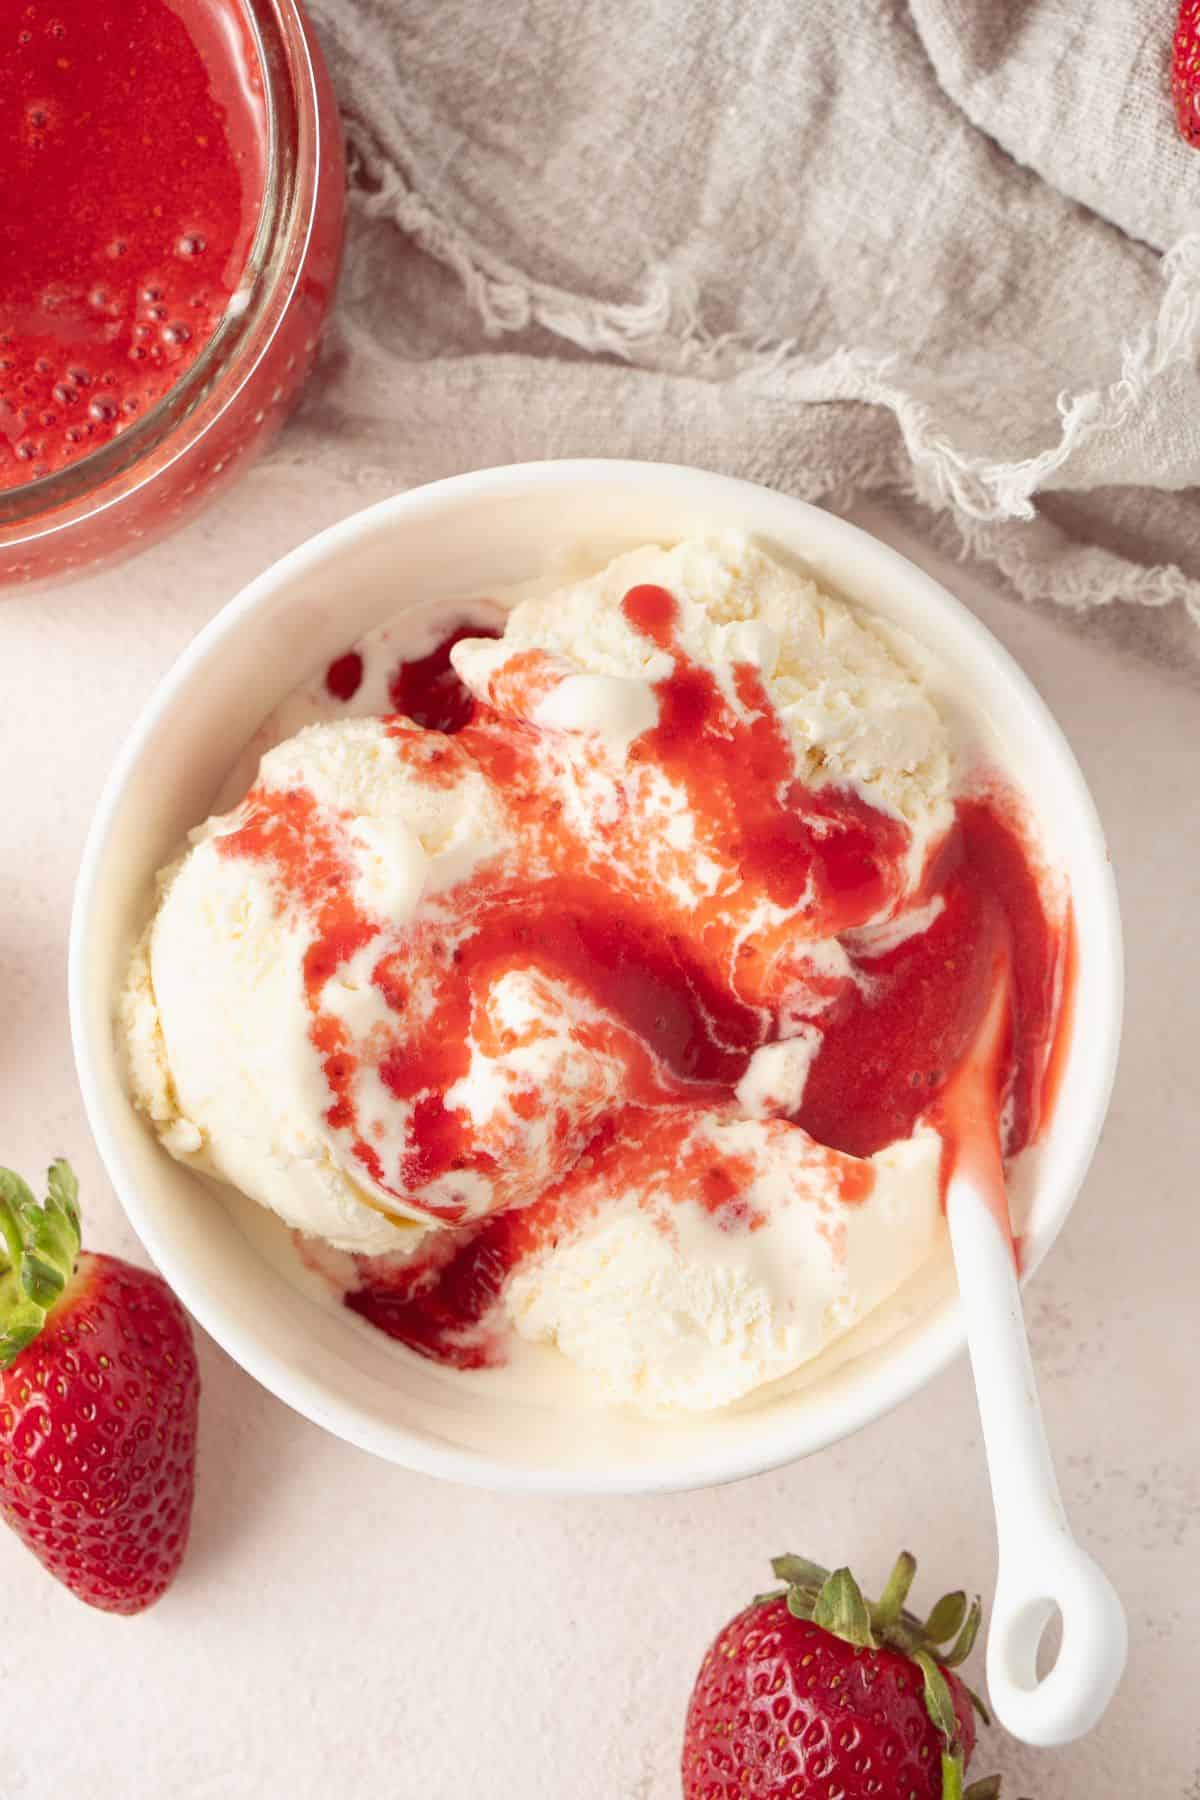 Dish of vanilla ice cream, topped with some strawberry sauce.